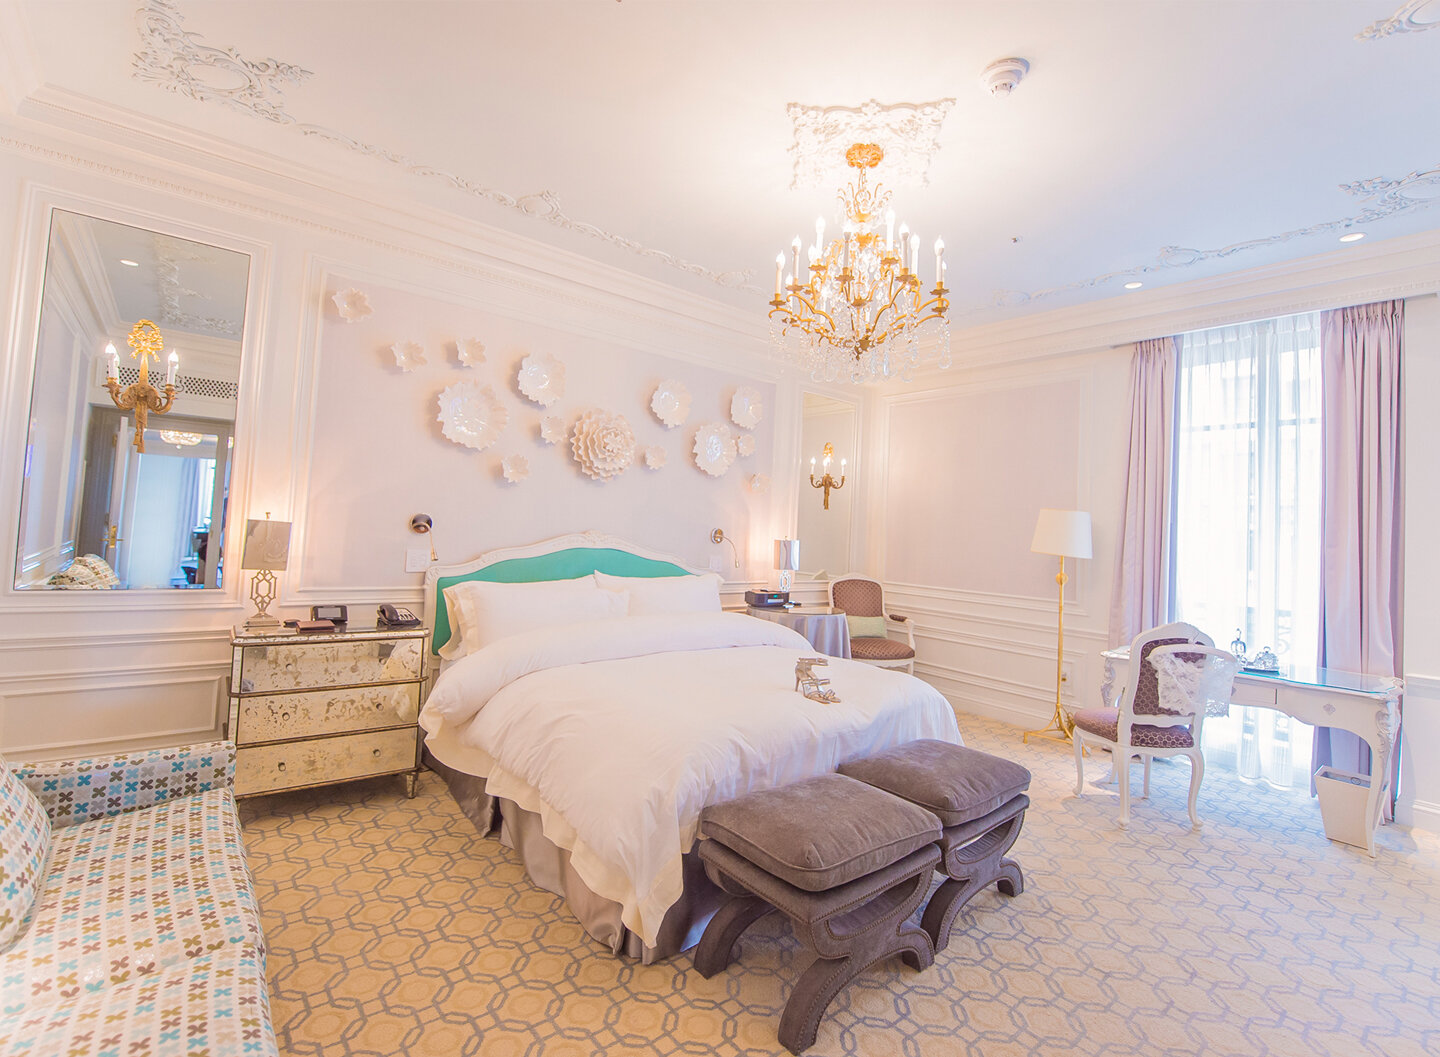 The Tiffany suite at St. Regis Hotel